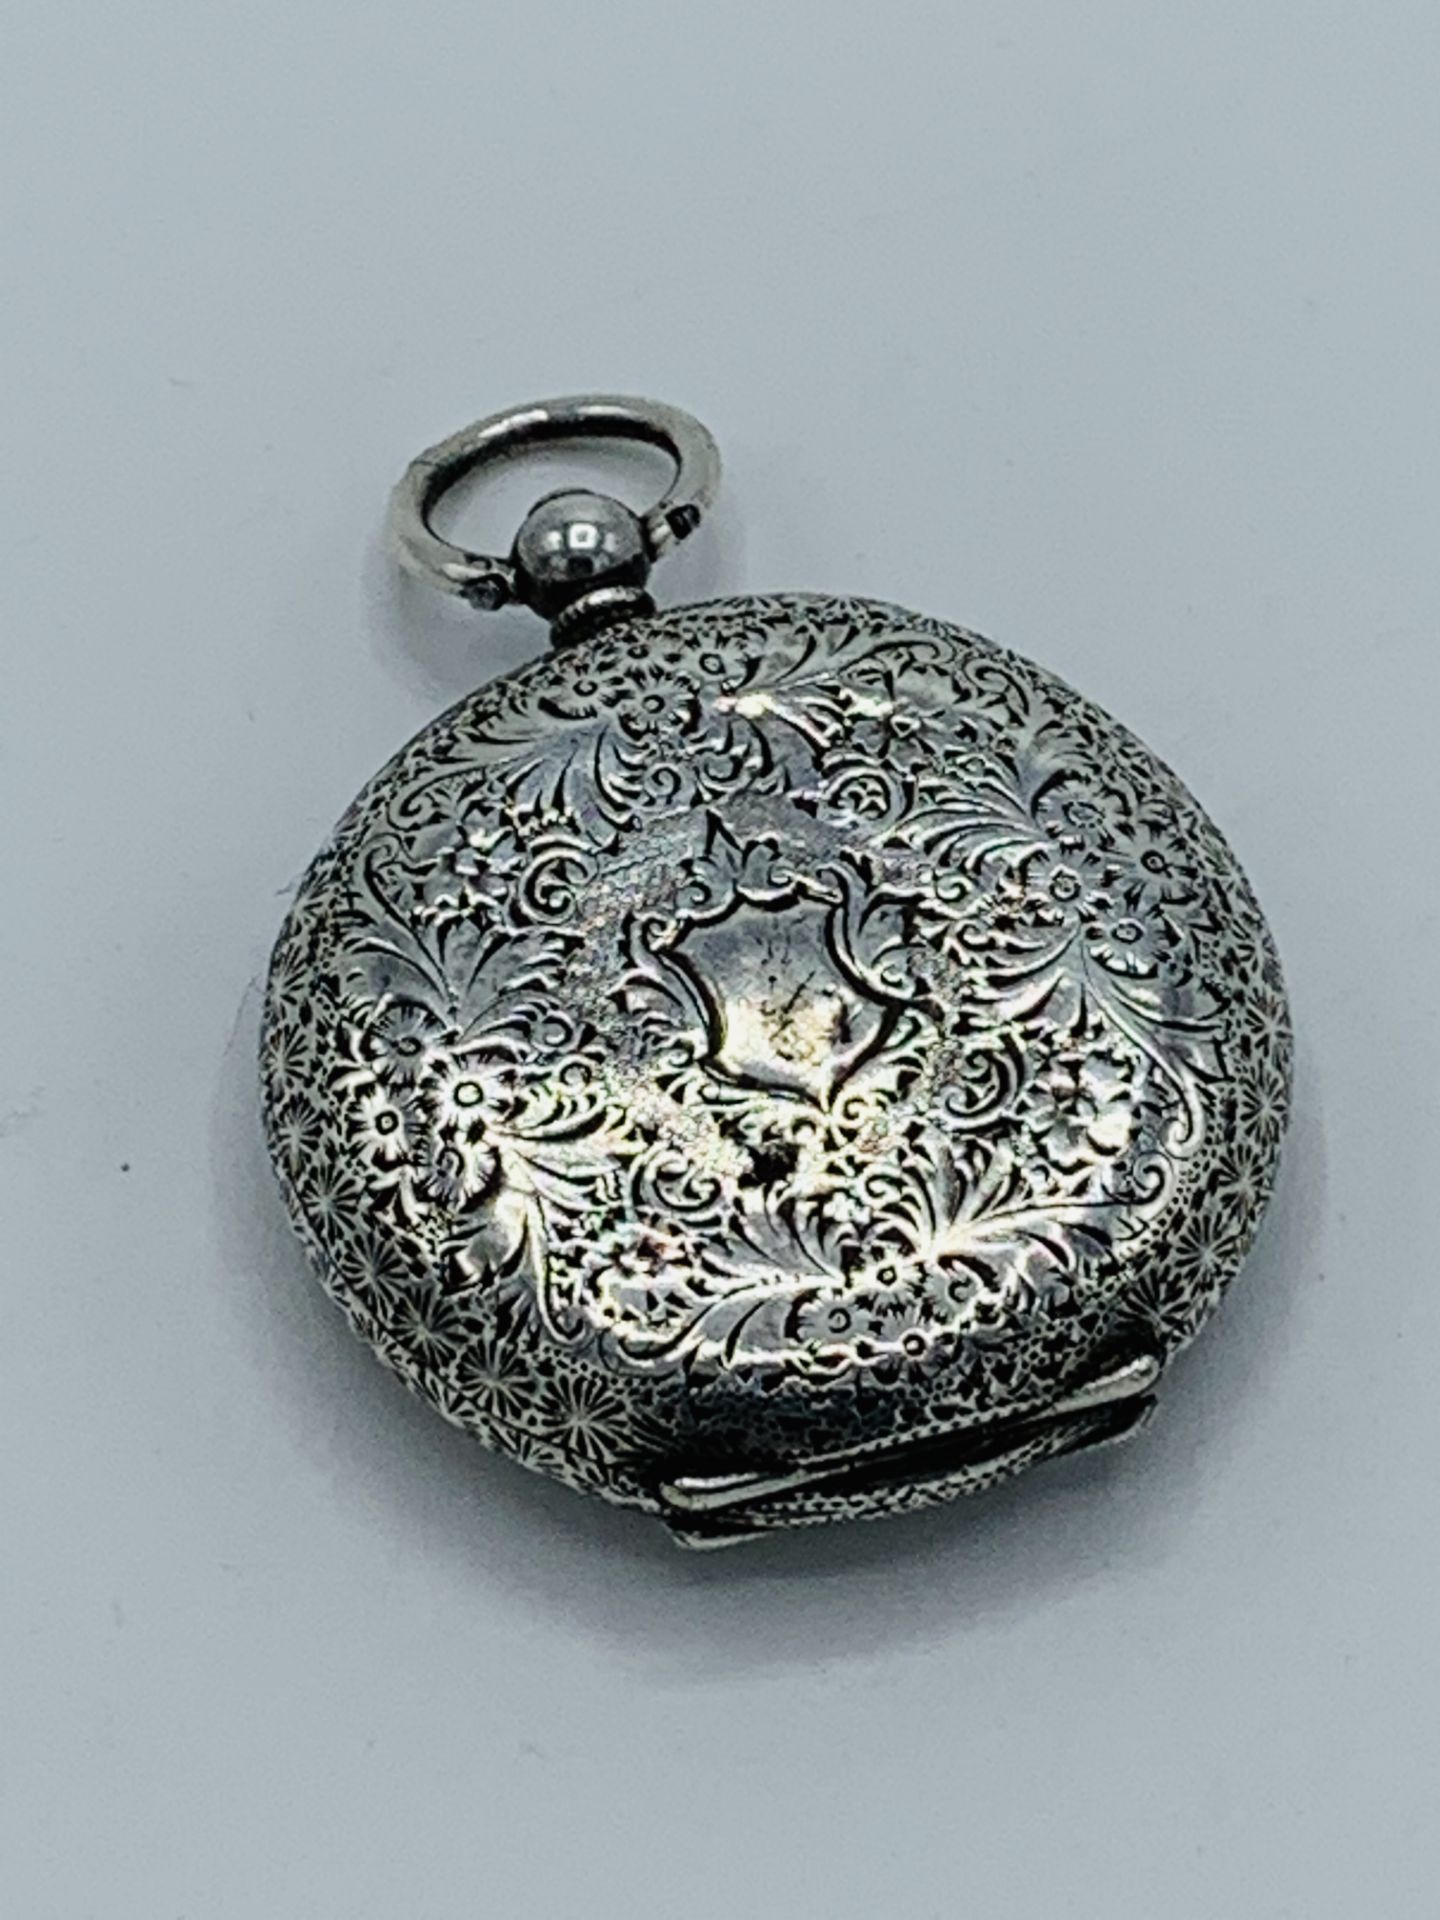 Lady's fob watch hallmarked 935, with white enamel face, and winding key. - Image 3 of 4